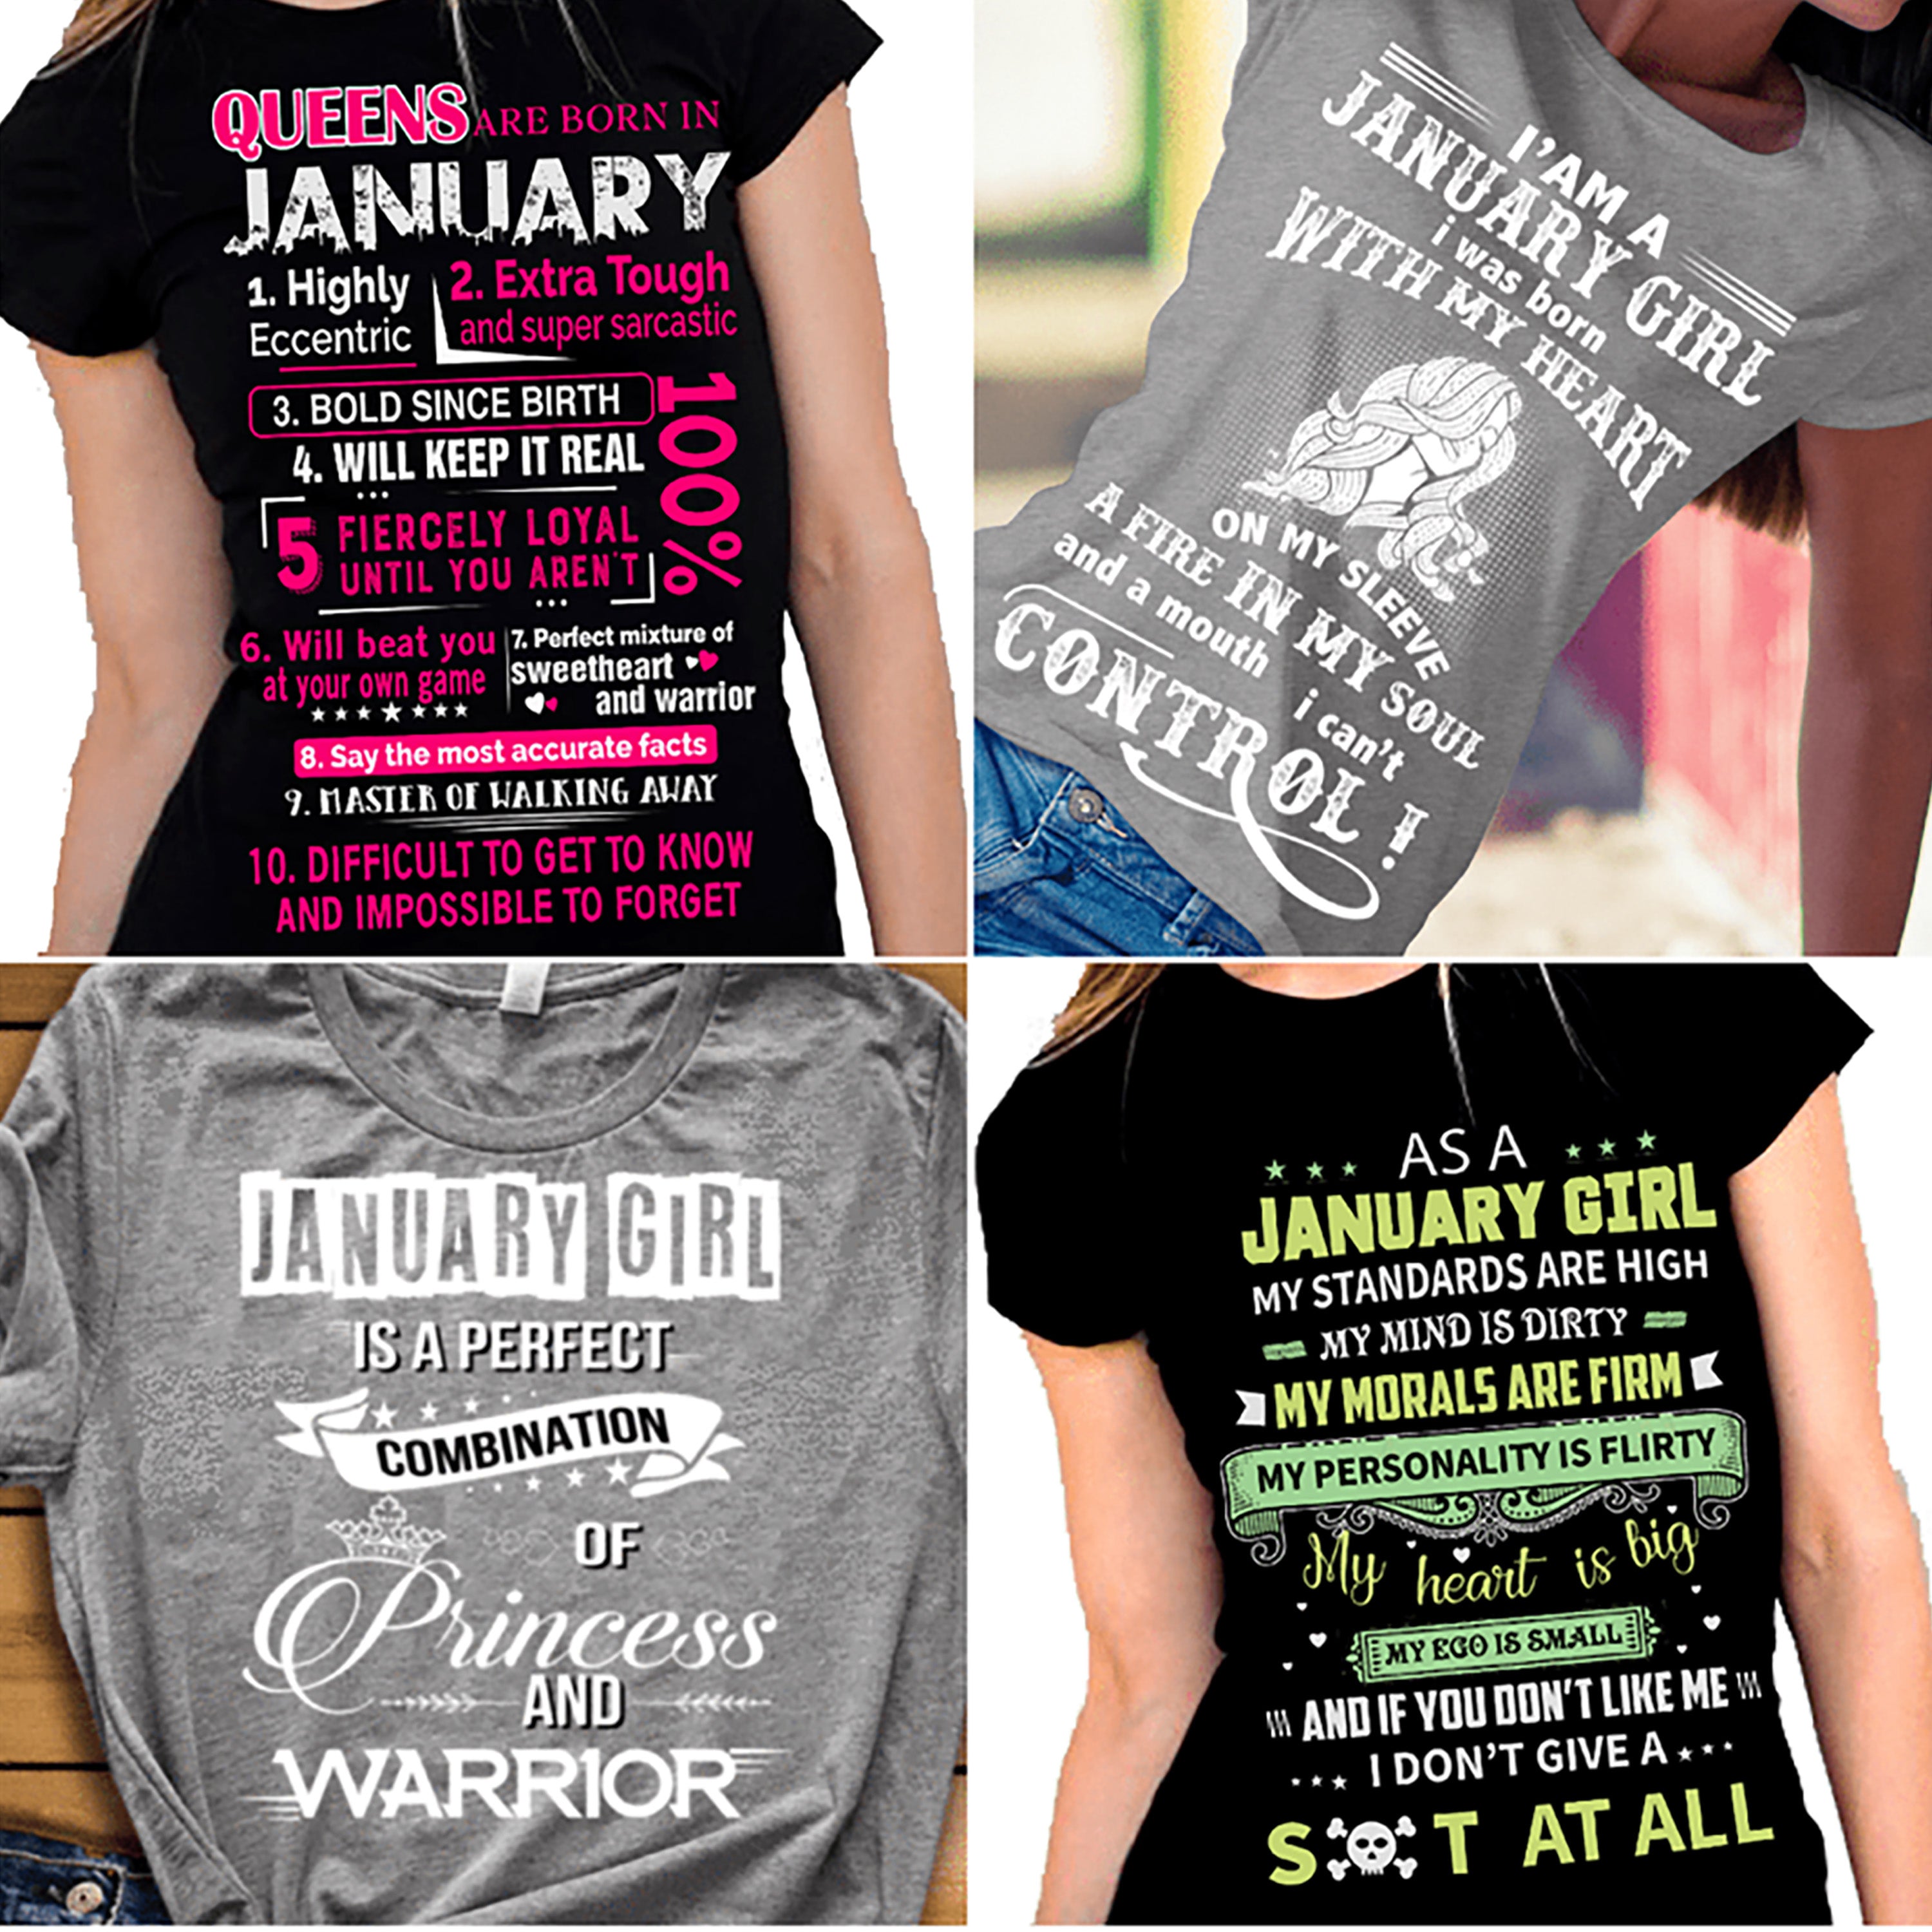 "January Pack Of 4 Shirts"